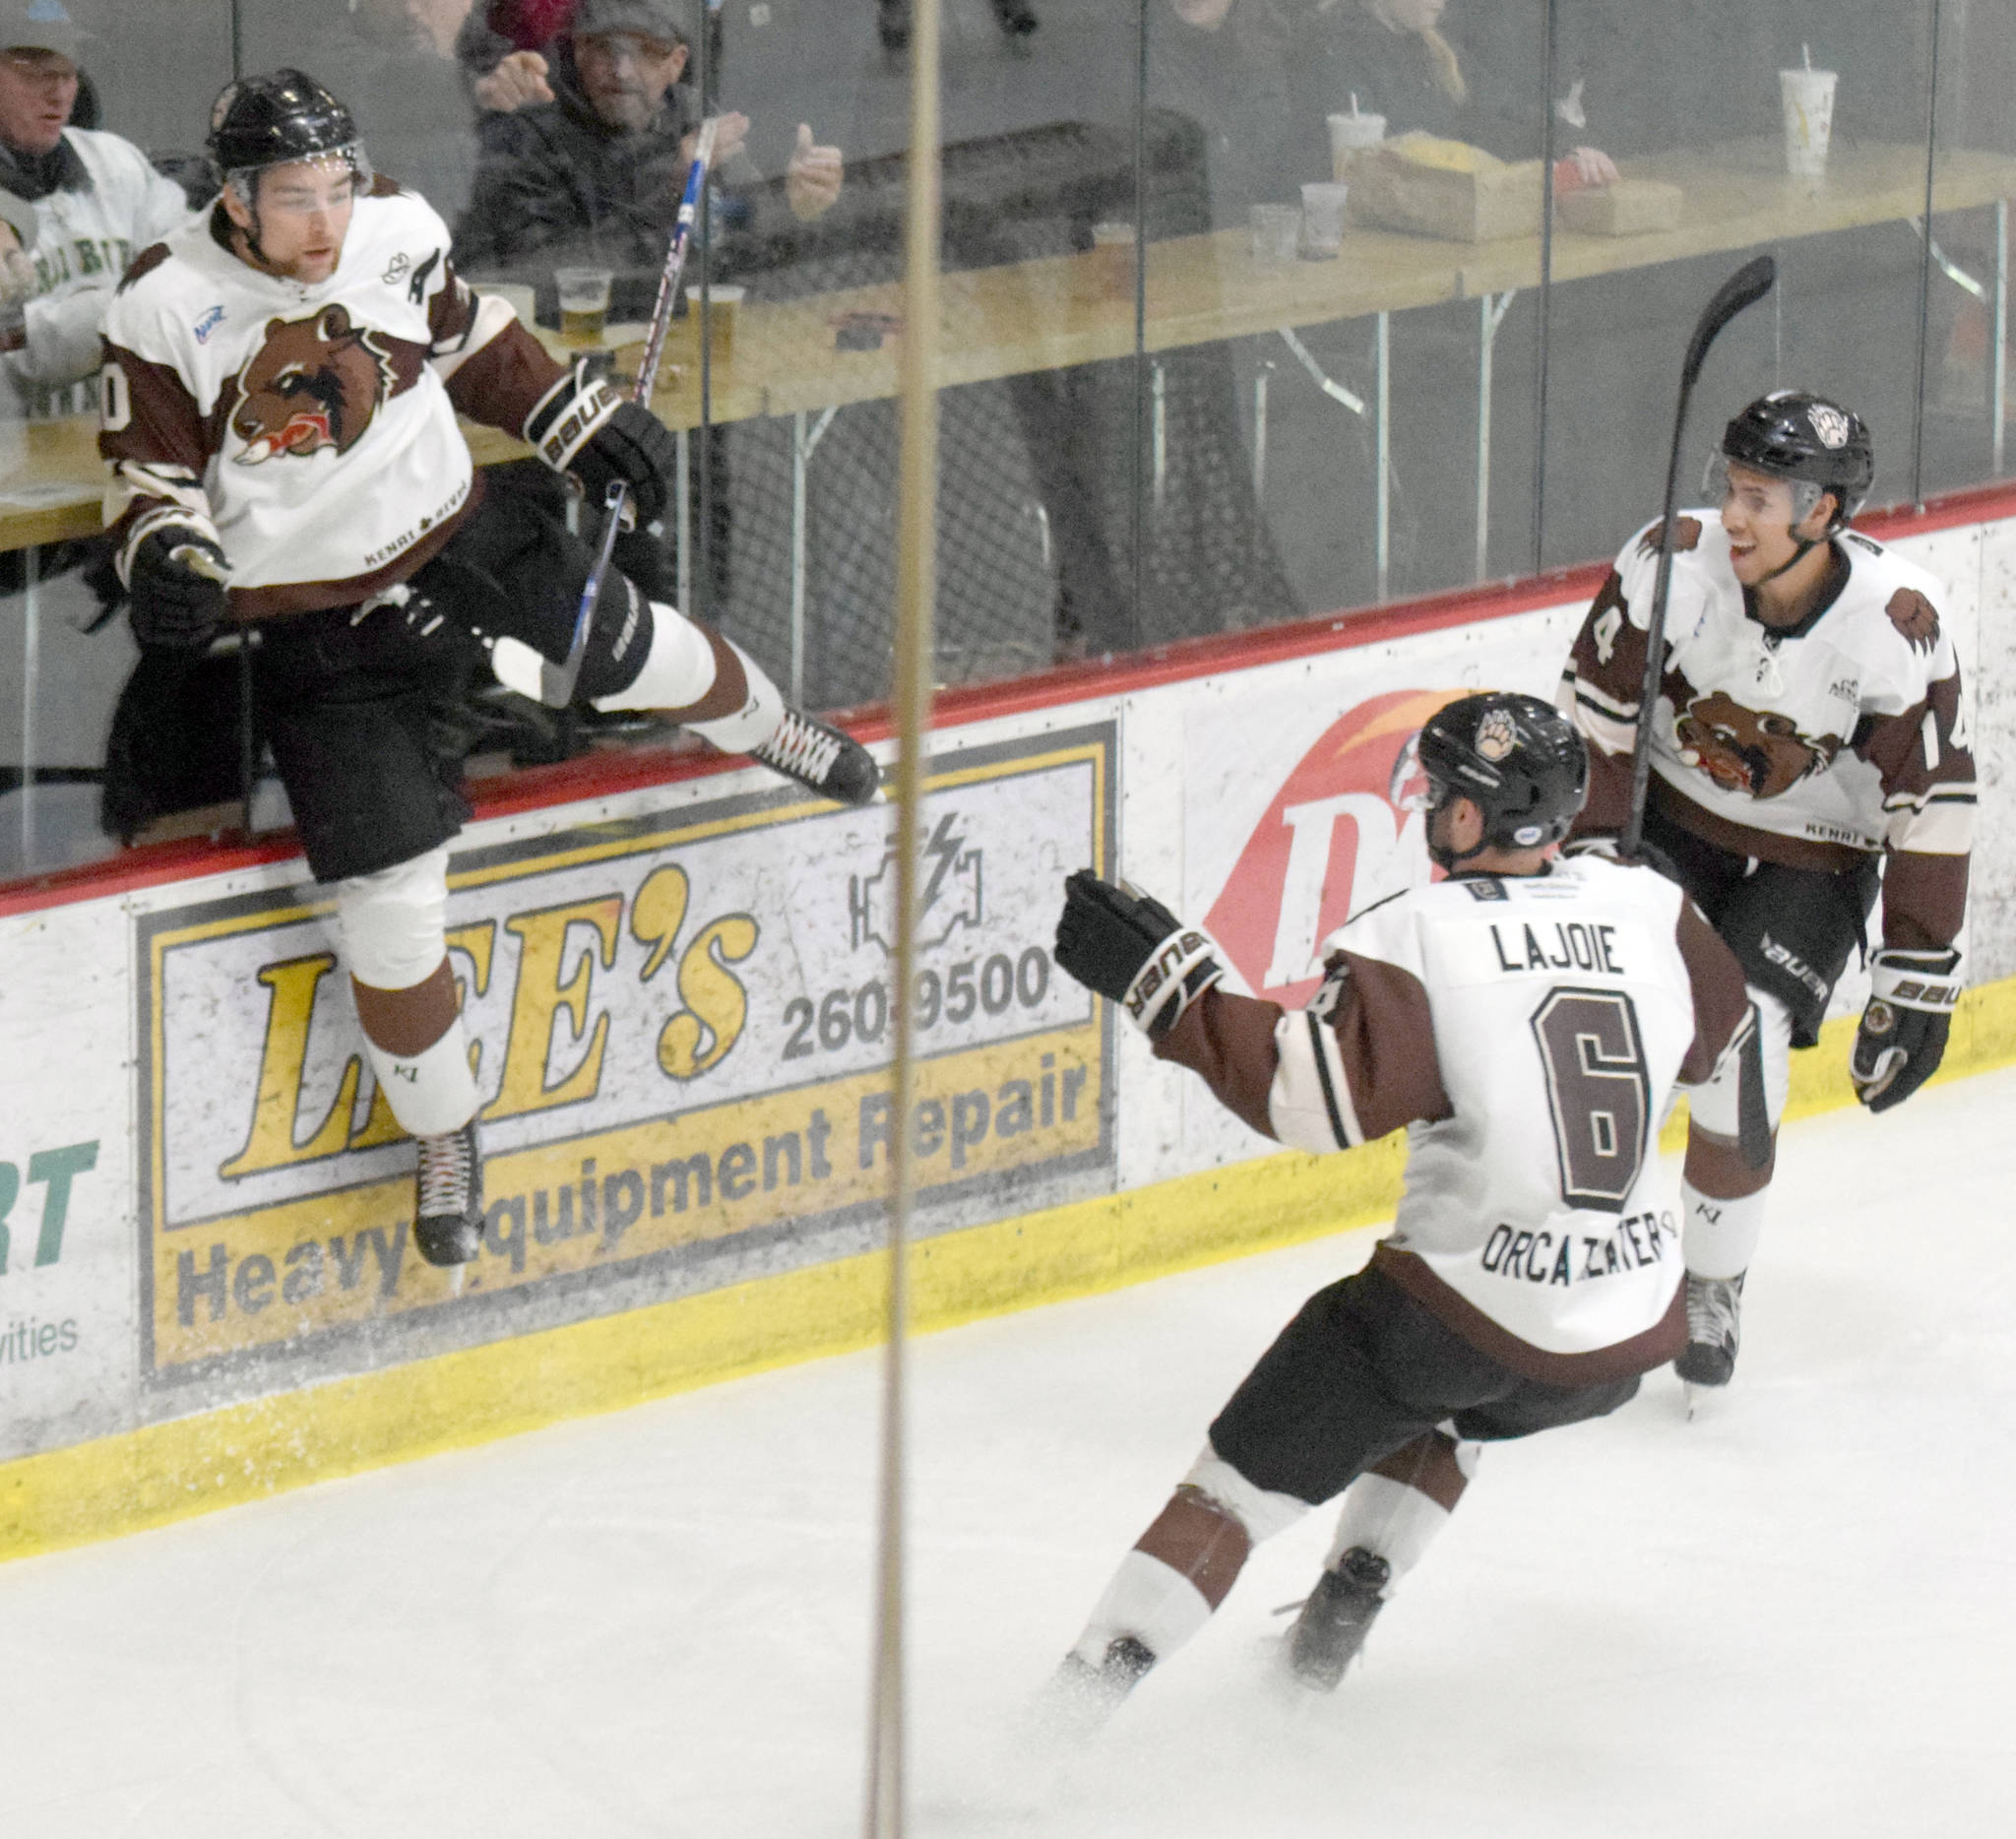 Kenai River Brown Bears forward Laudon Poellinger jumps on the boards to celebrate his first-period goal against the Fairbanks Ice Dogs with Brandon Lajoie and Ryan Reid at the Soldotna Sports Center in Soldotna, Alaska. (Photo by Jeff Helminiak/Peninsula Clarion)